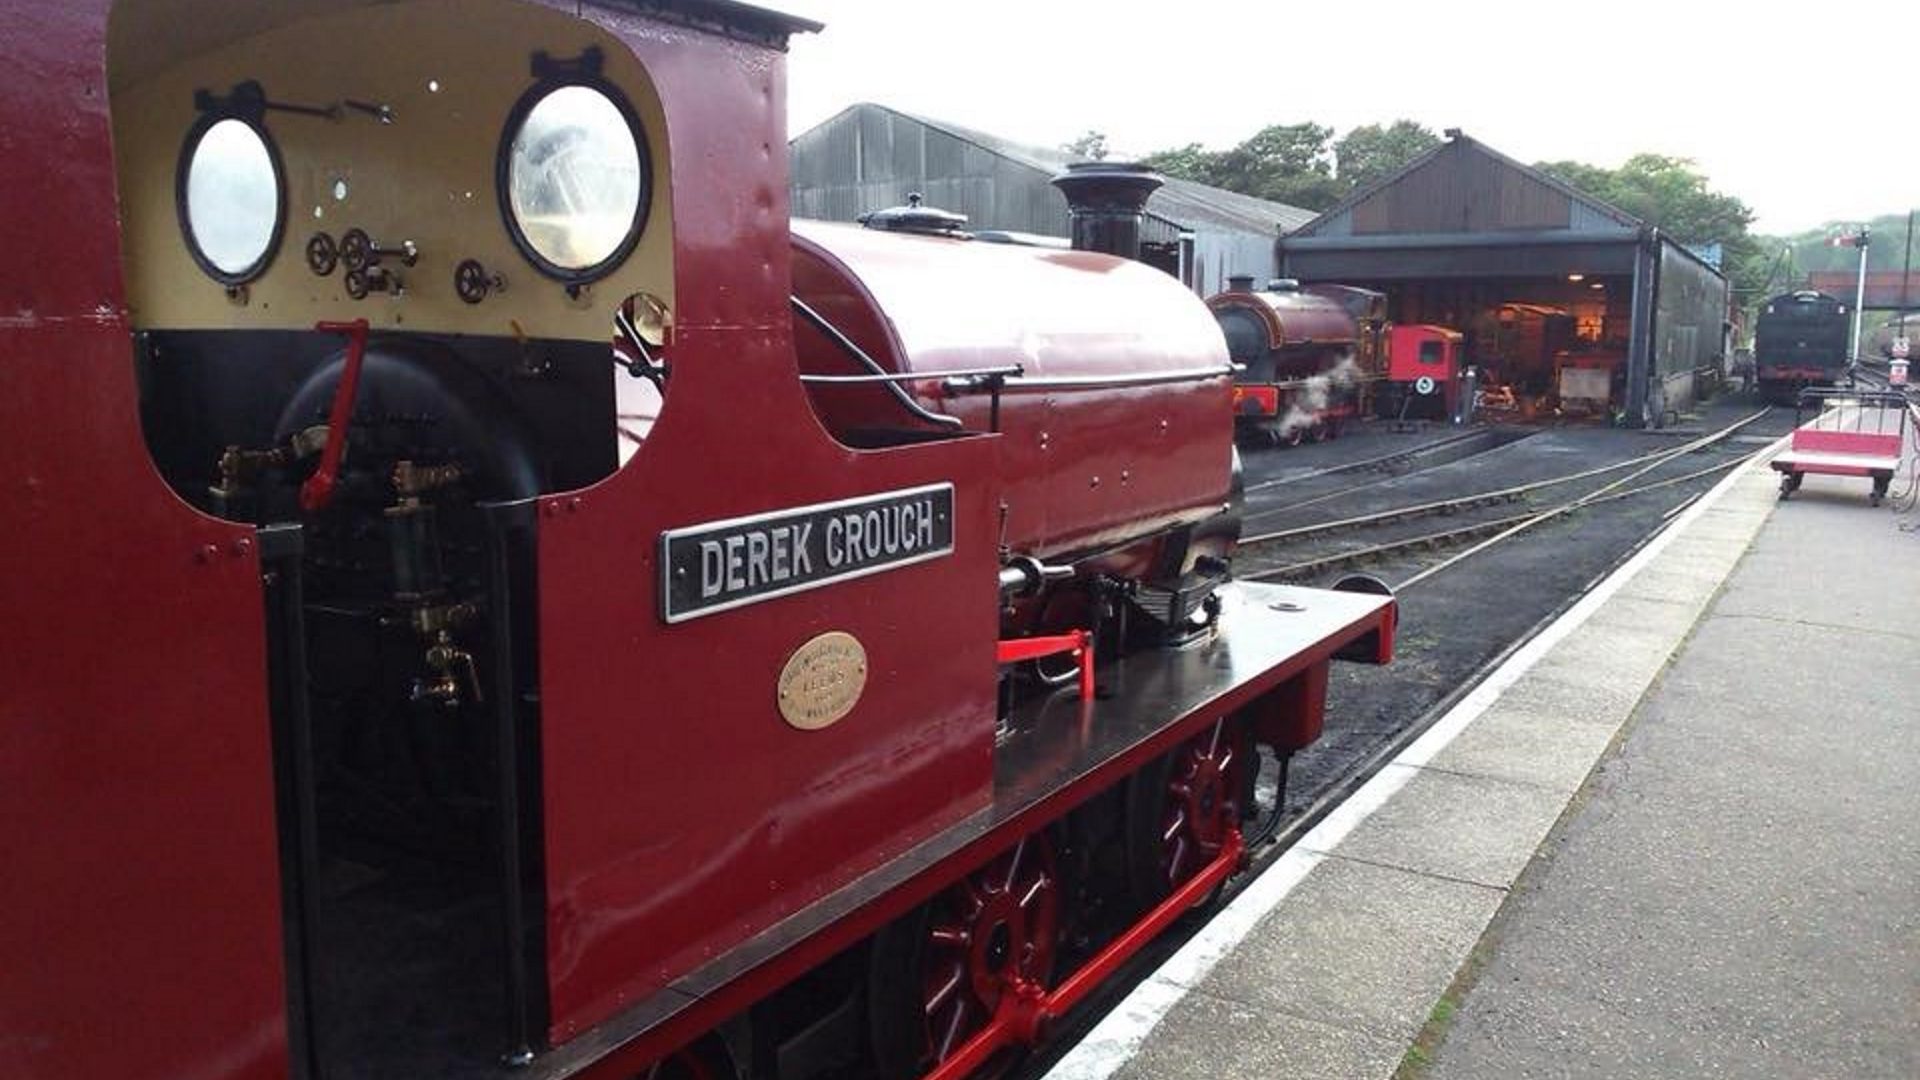 Derek Crouch on display at Wansford Station // Credit The Small Loco Group FB Page